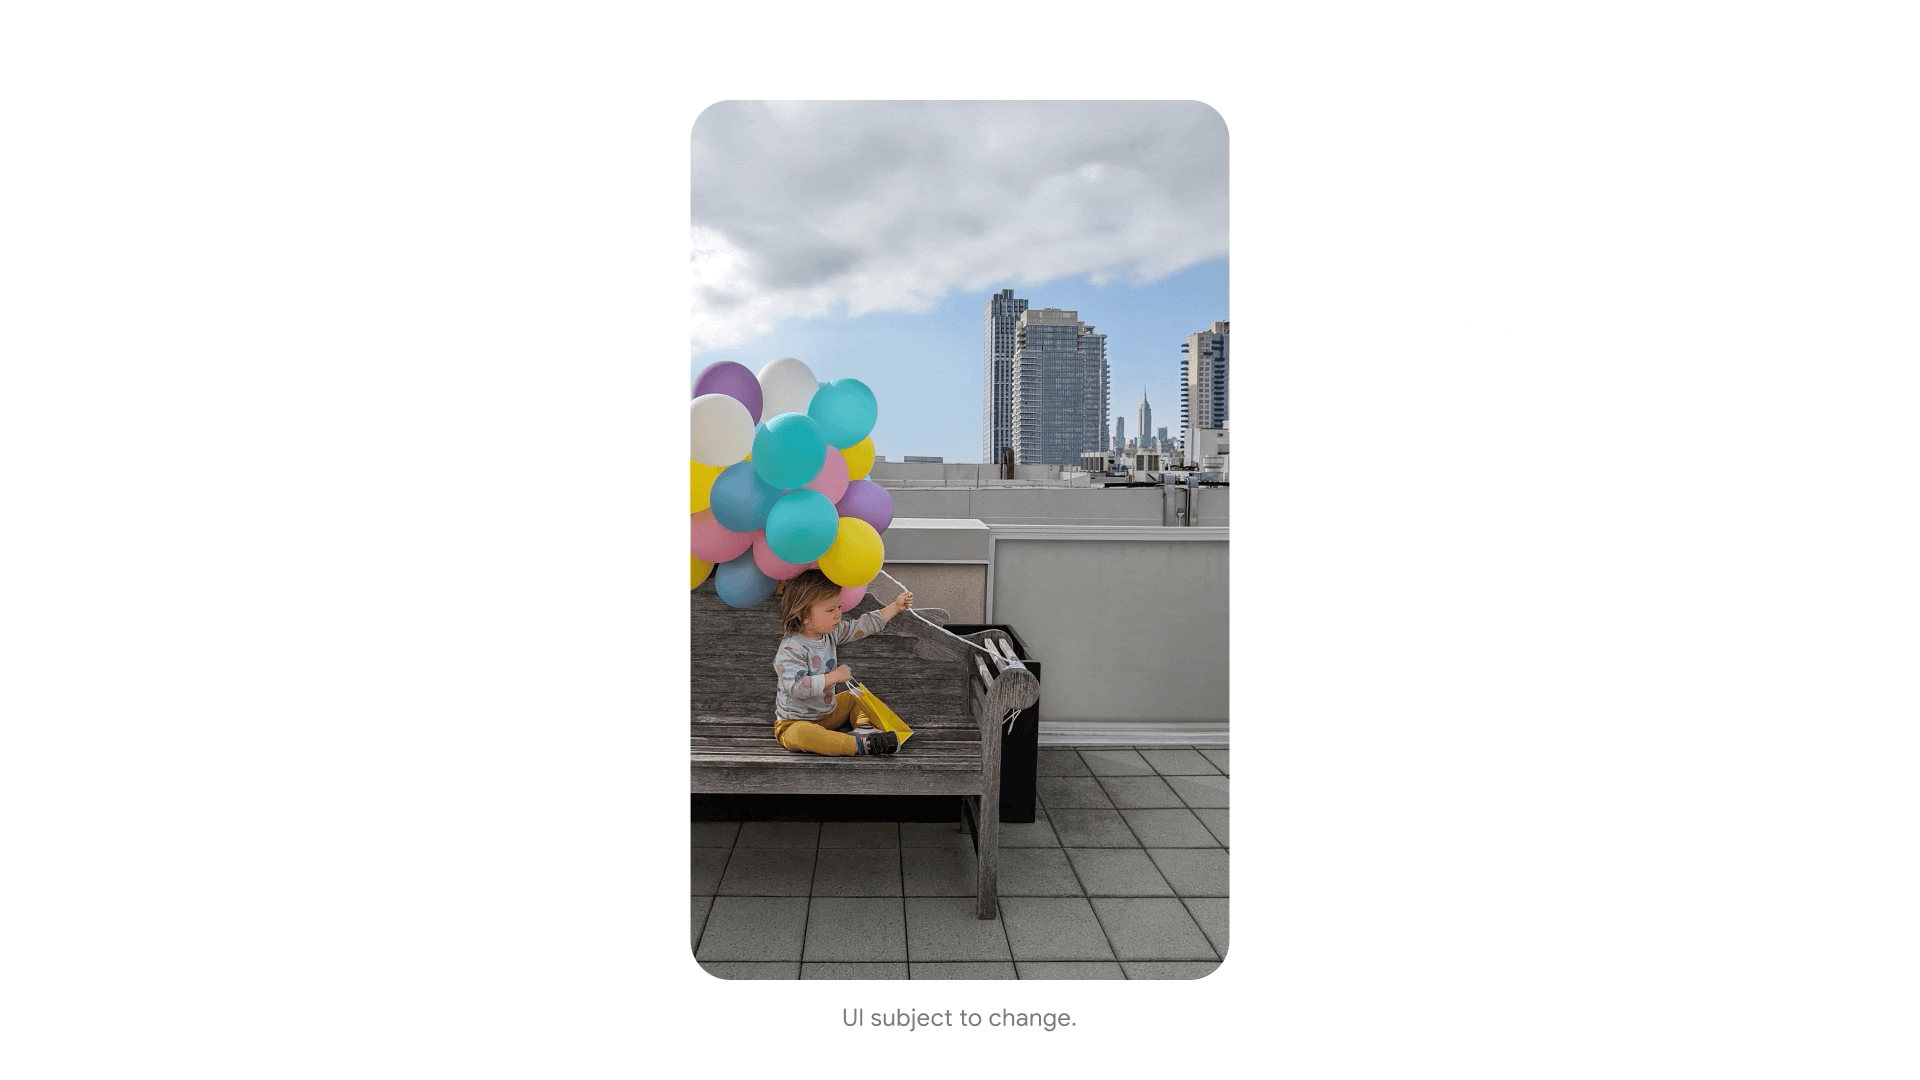 An animation of a toddler-aged boy on a bench on a rooftop, holding a bunch of colorful balloons, with a city skyline in the background. In the shot on the right the boy is centered, you see more of the bench and balloons and the sky is clearer.